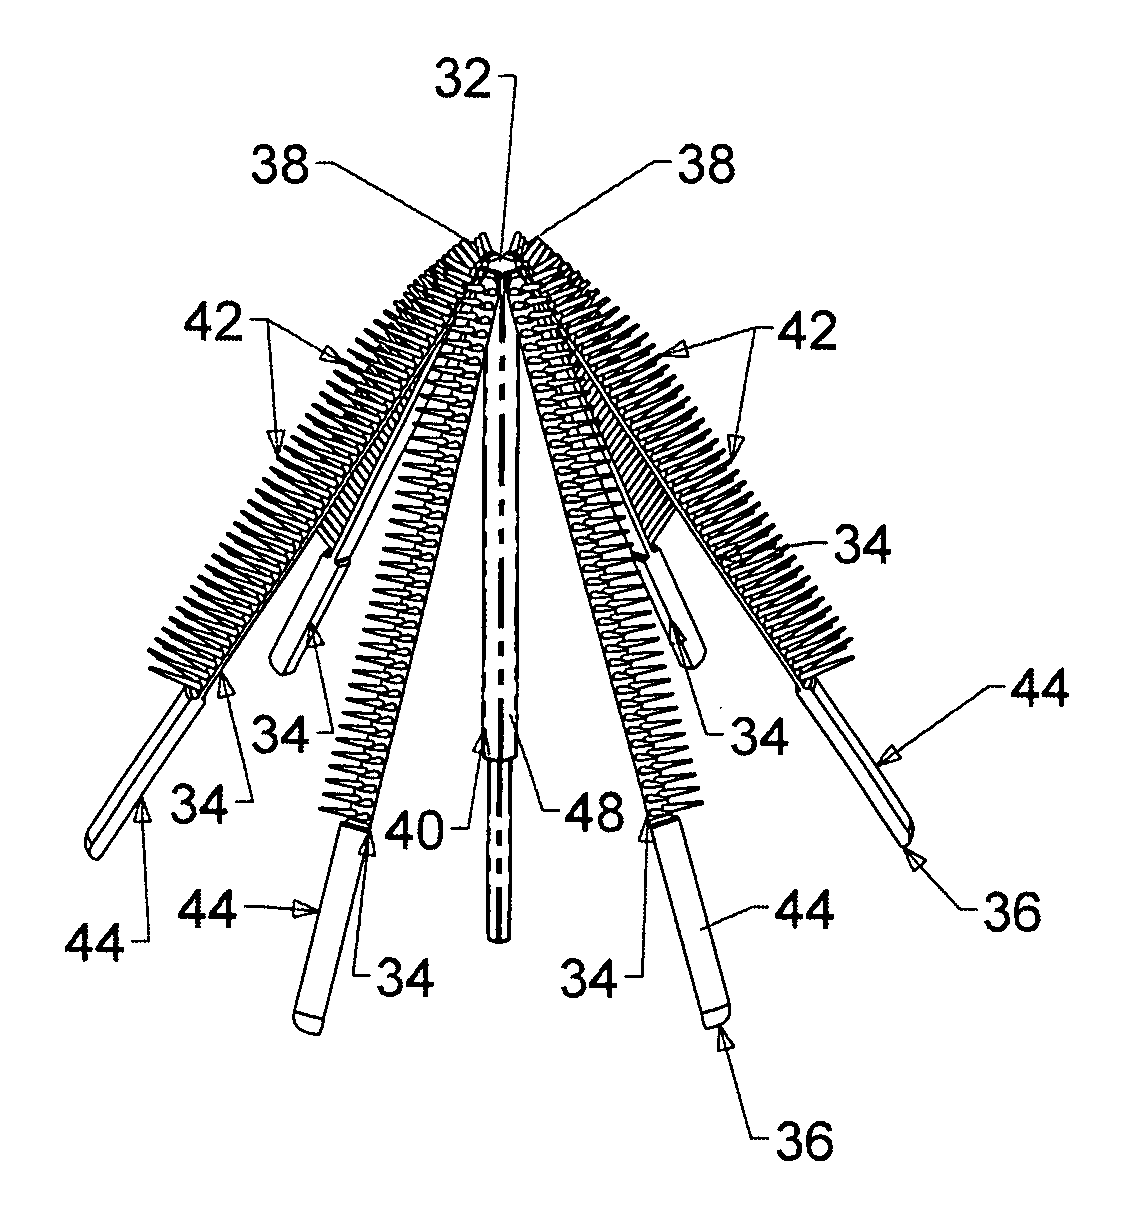 Cosmetic applicators and methods of manufacture